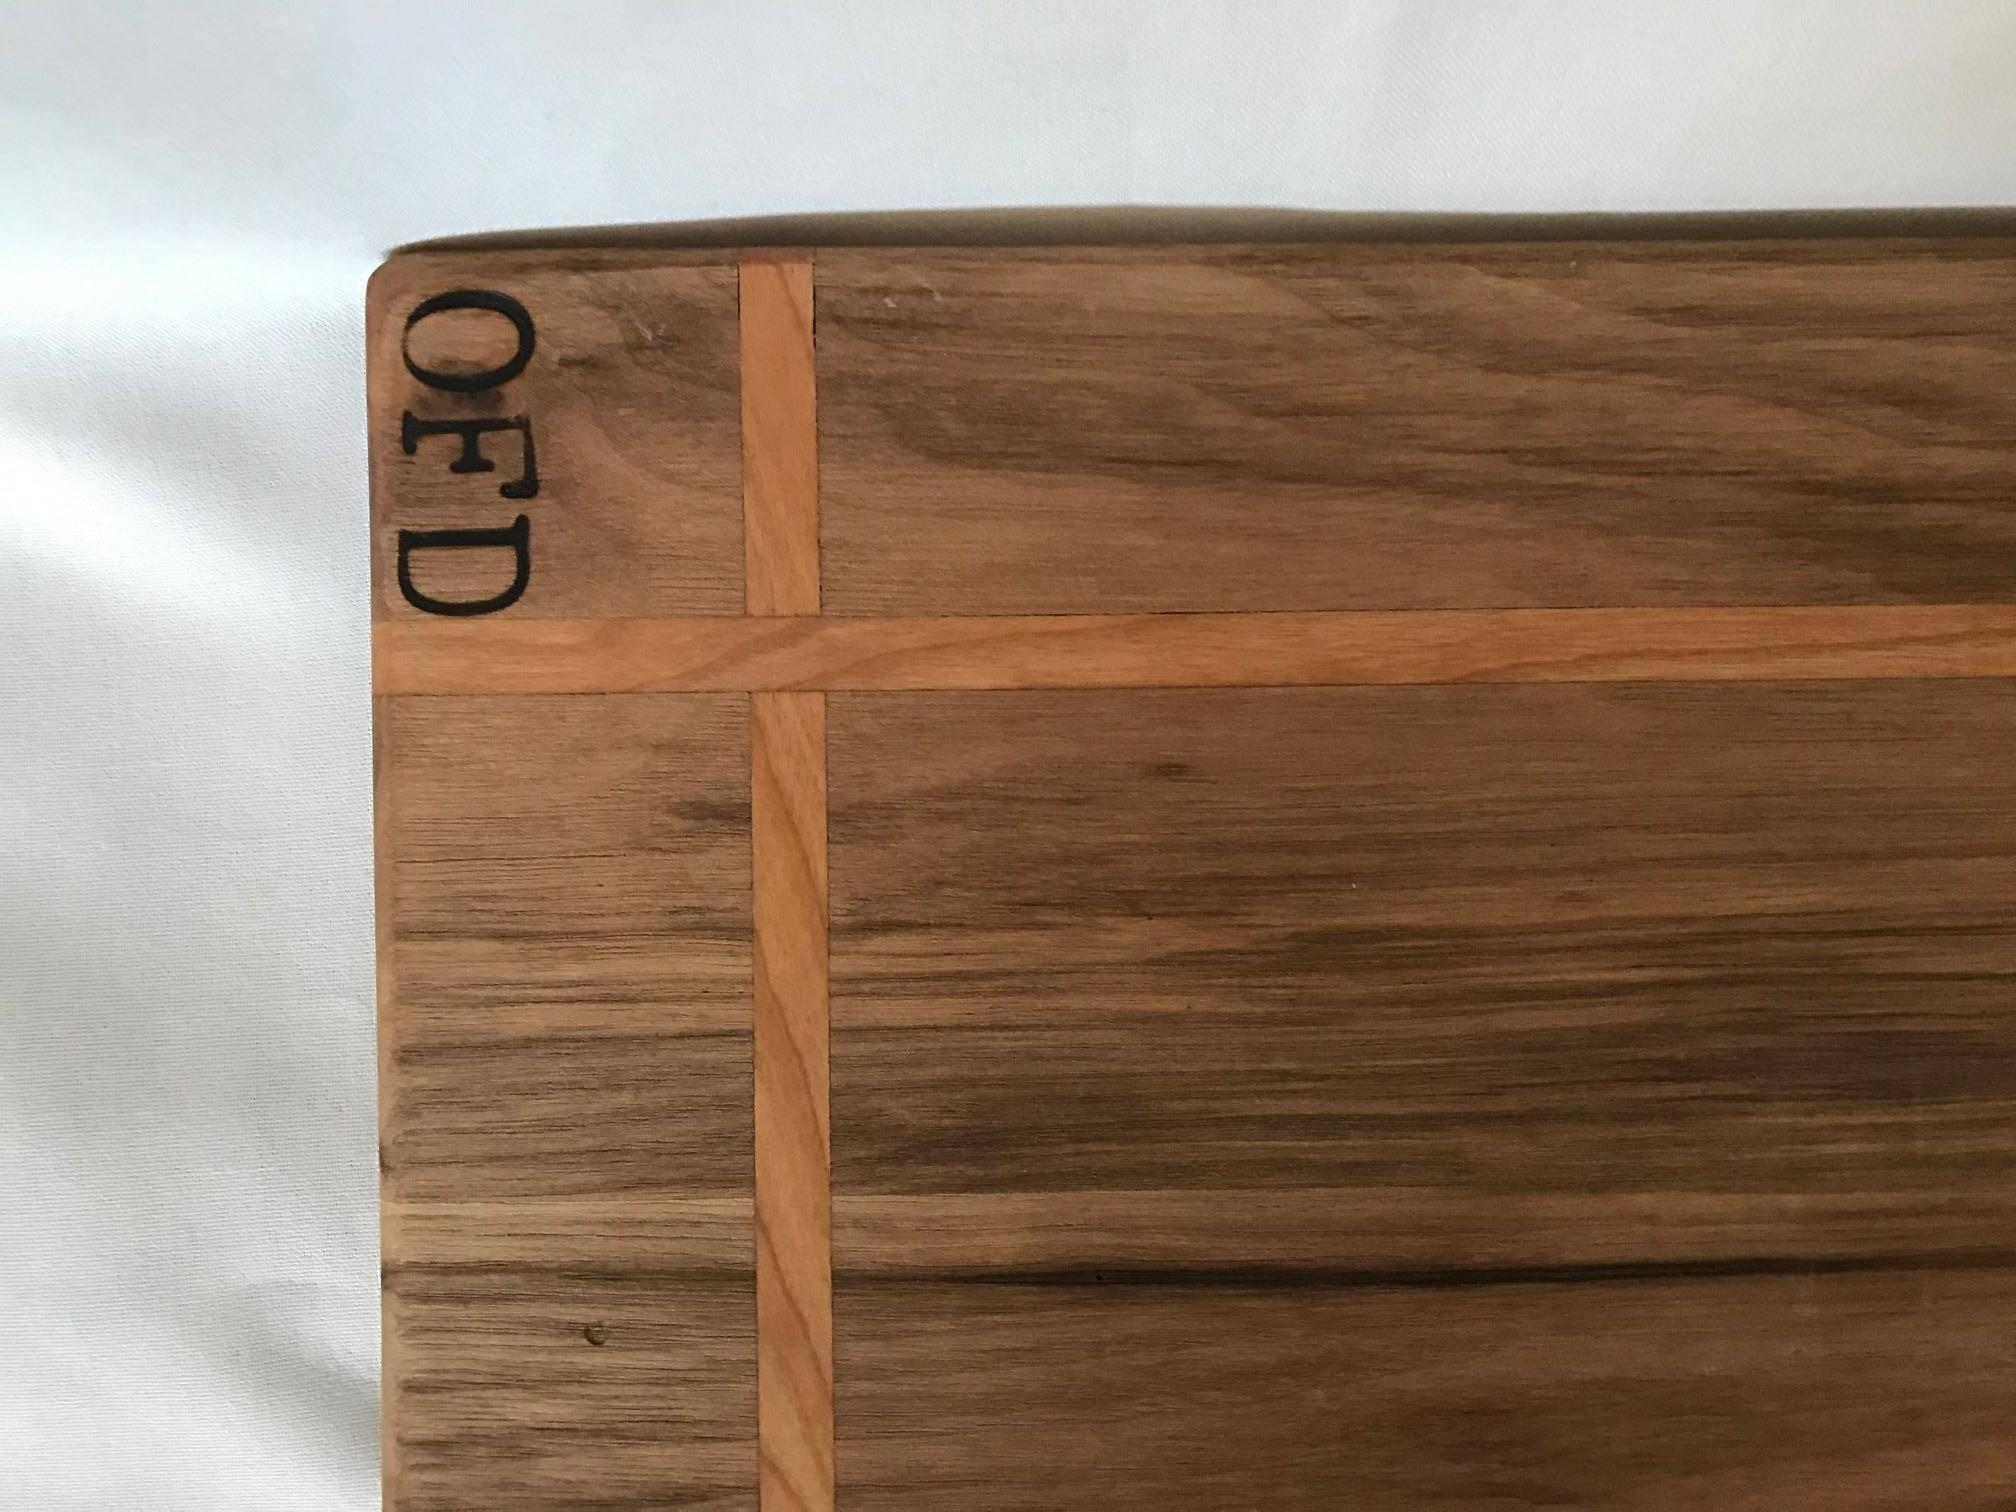 Handcrafted walnut and cherry inlay cutting board - custom-made mineral treated 100% food safe. This is a beautiful piece of art and craftsmanship. Would be beautiful in your home or as a gift IDEA for that someone special (chef)! 

Free